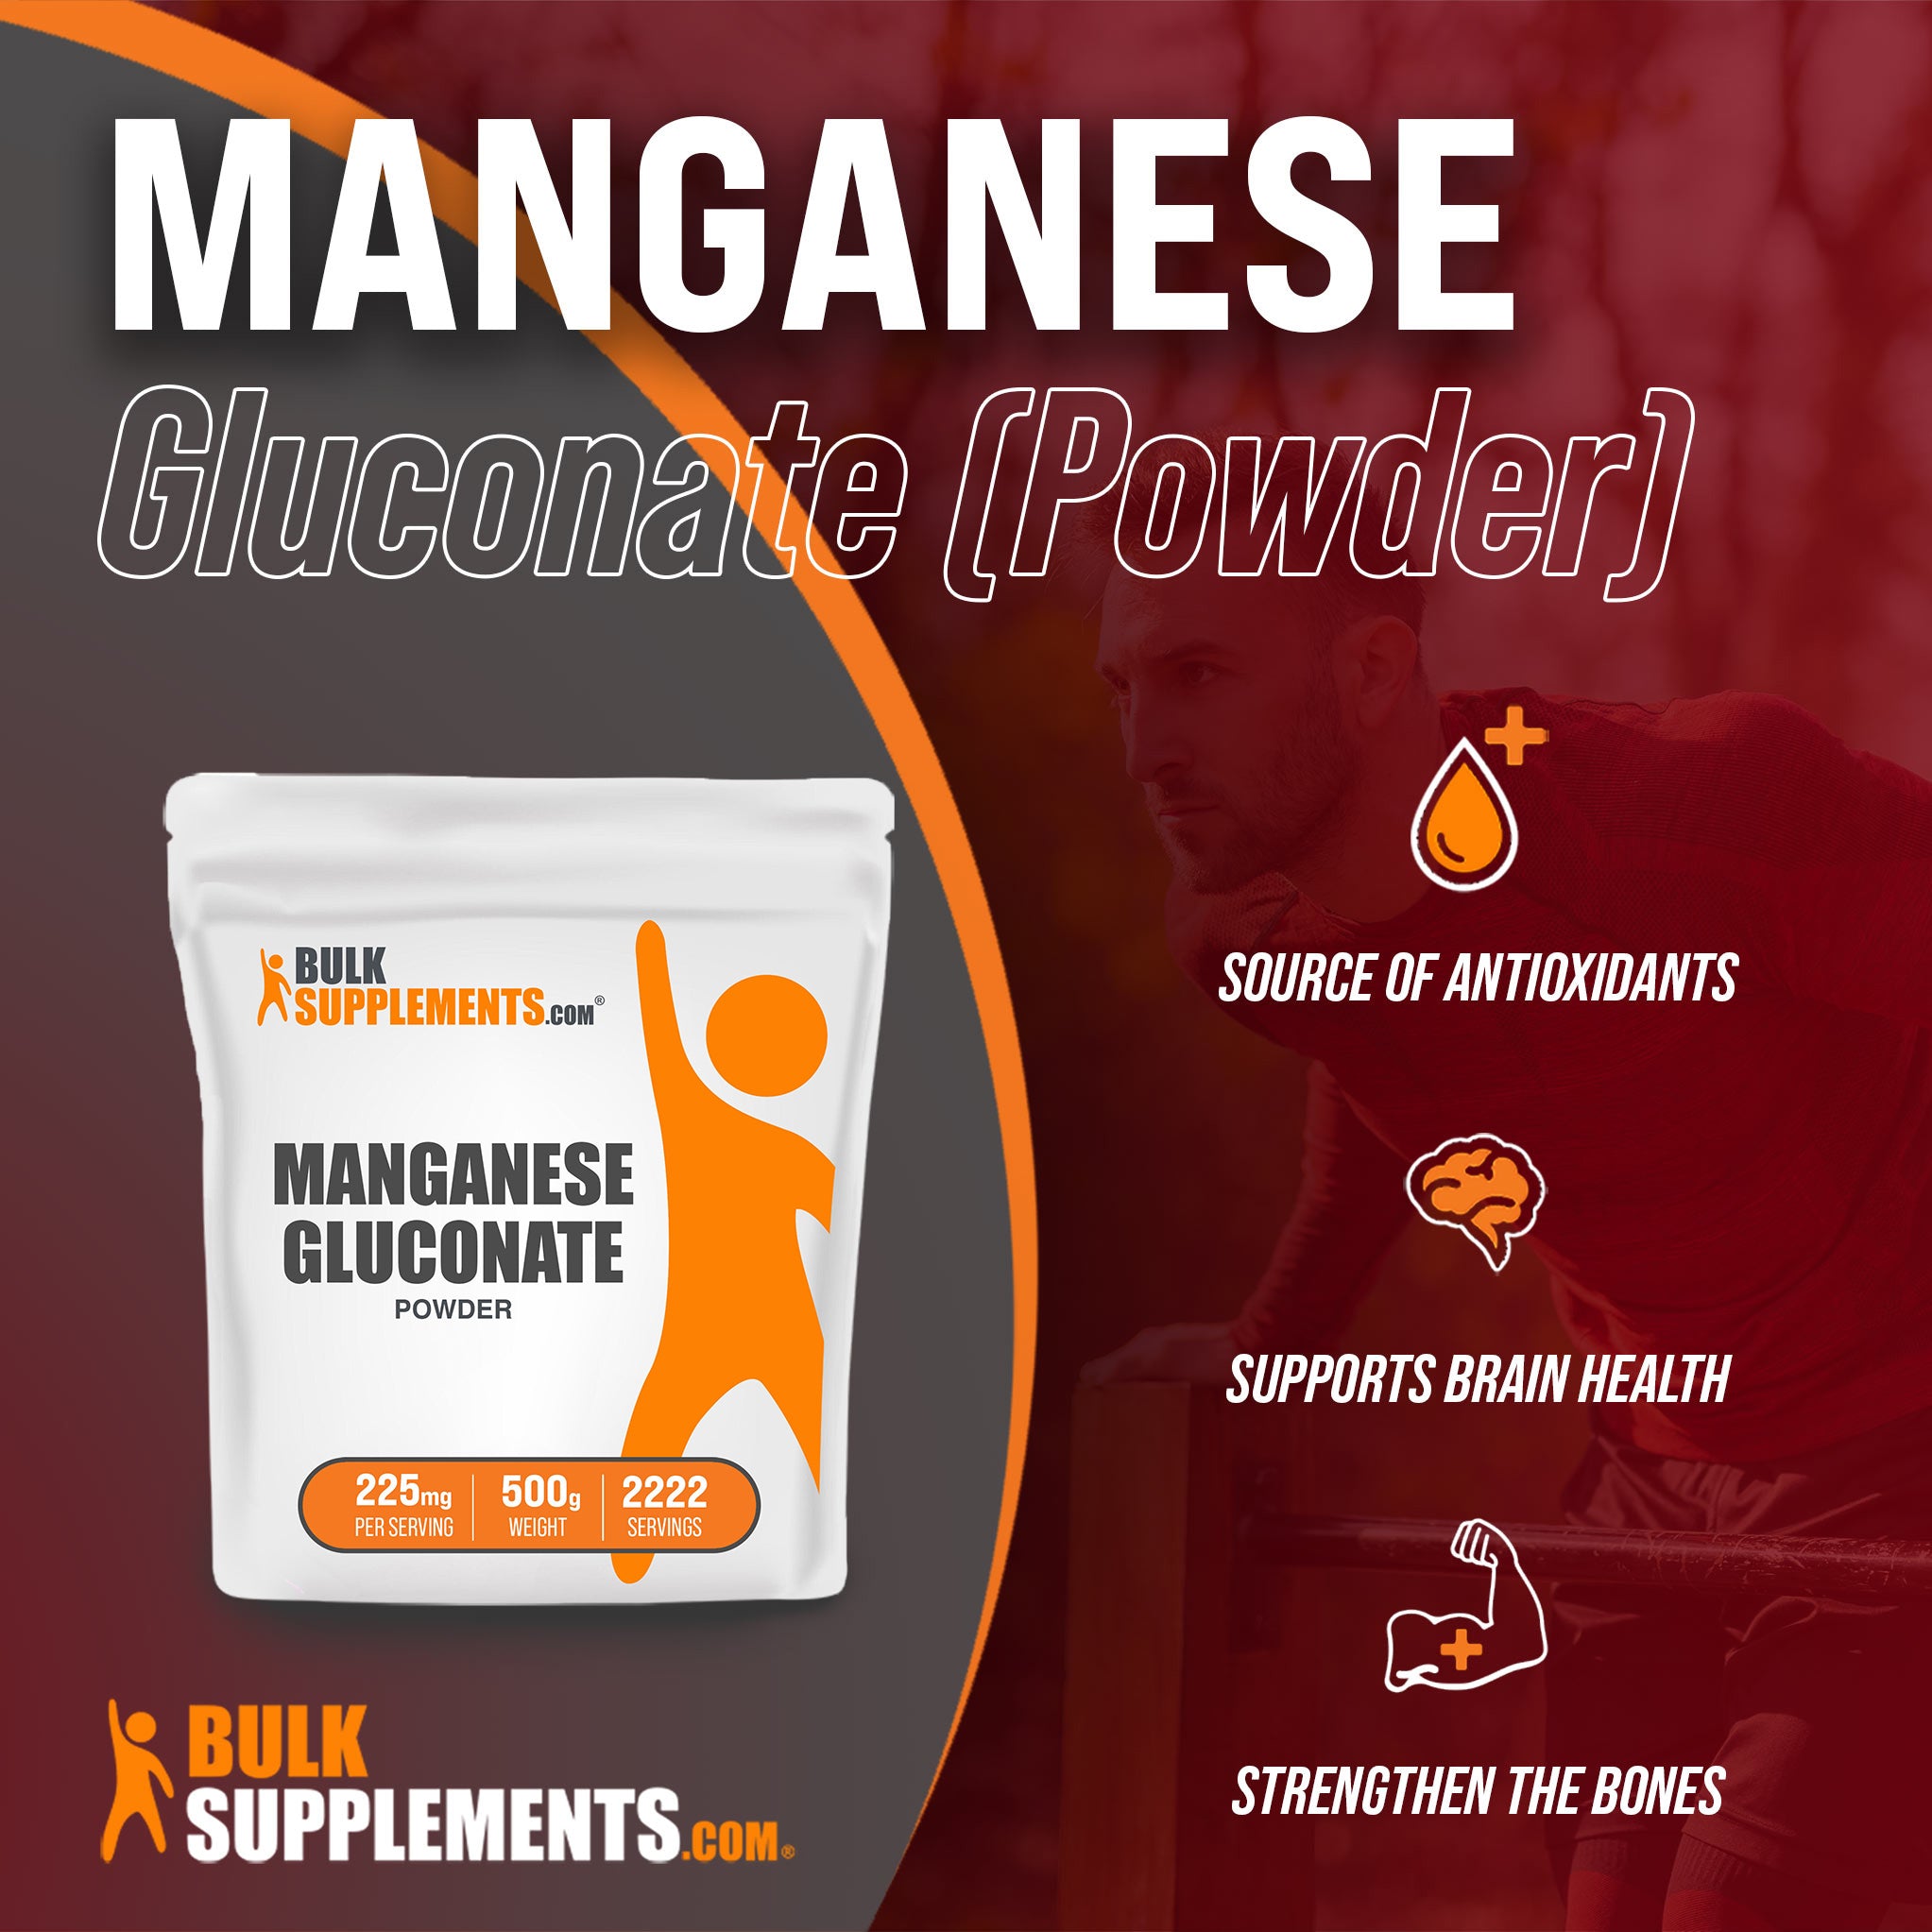 Benefits of Manganese Gluconate: source of antioxidants, supports brain health, strengthen the bones